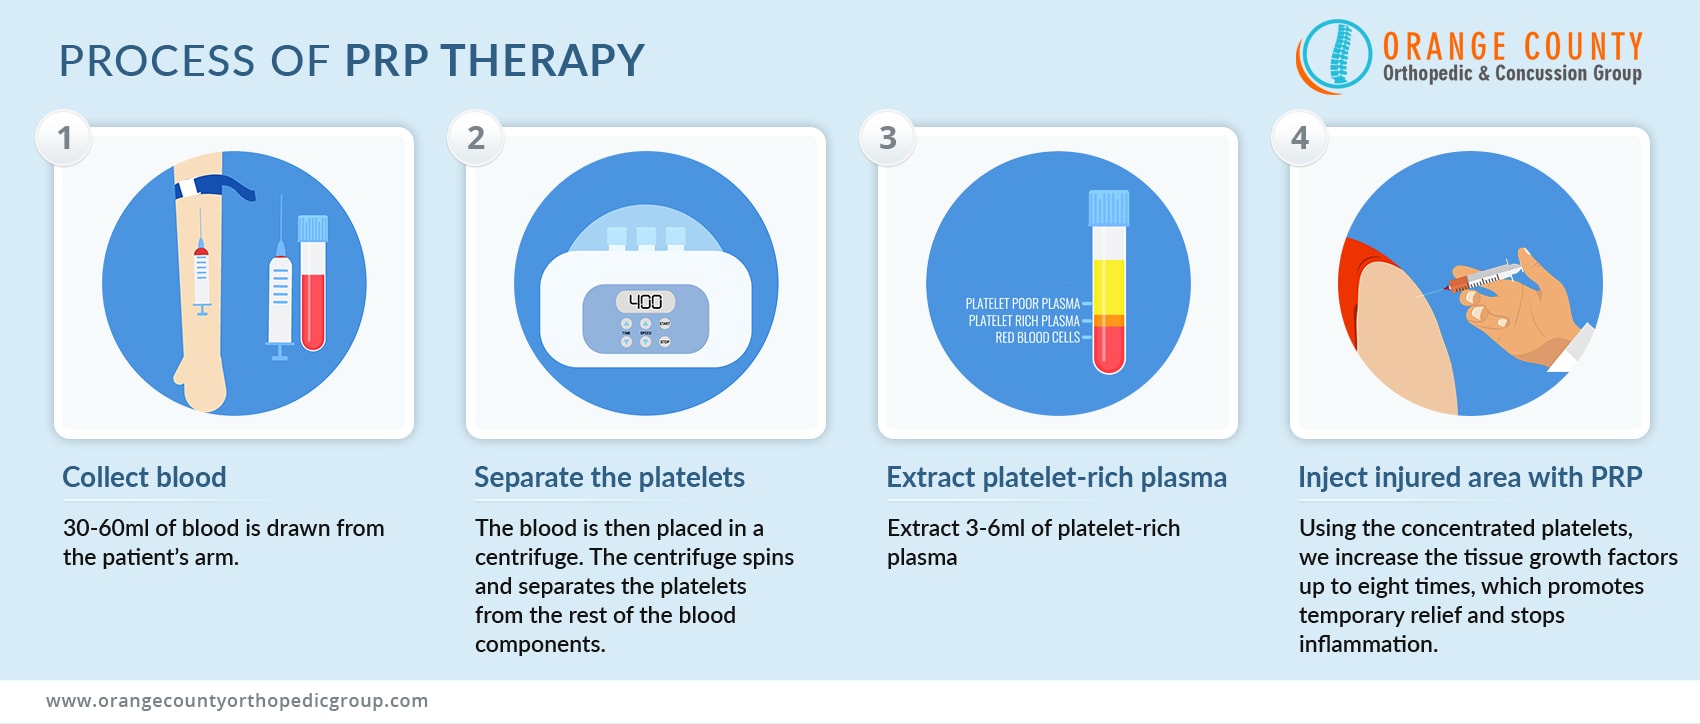 Process-of-PRP-Therapy-OC-Orthopedic-Group